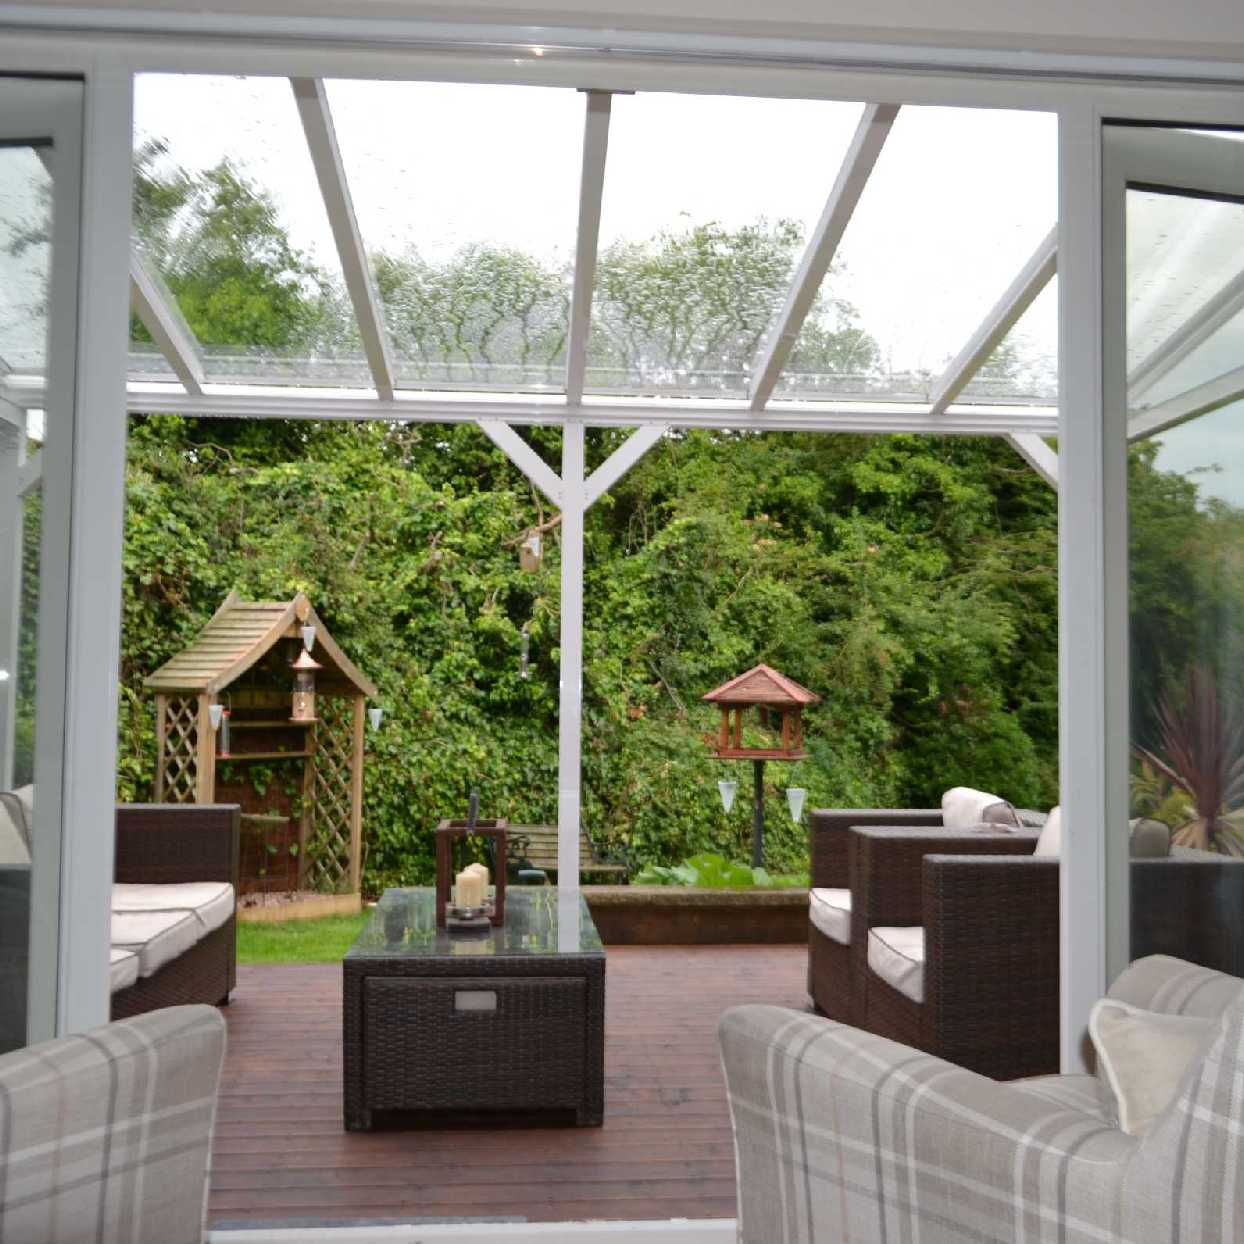 Buy Omega Smart Free-Standing, White MonoPitch Roof Canopy with 6mm Glass Clear Plate Polycarbonate Glazing - 4.9m (W) x 4.0m (P), (6) Supporting Posts online today